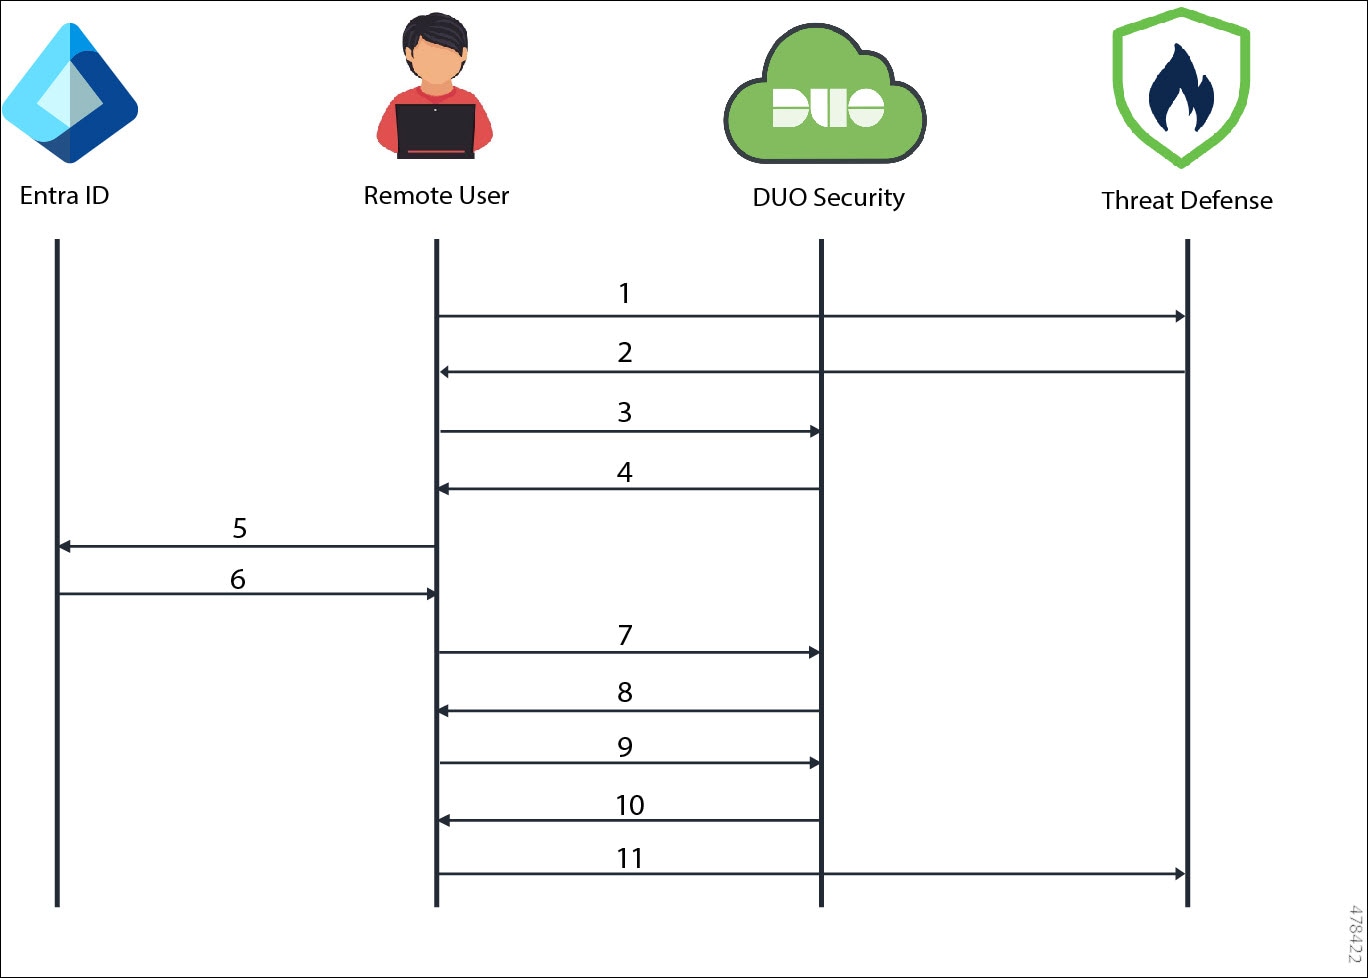 Diagram of the workflow that happens when a remote user authenticates to access the remote access VPN using Duo SSO.